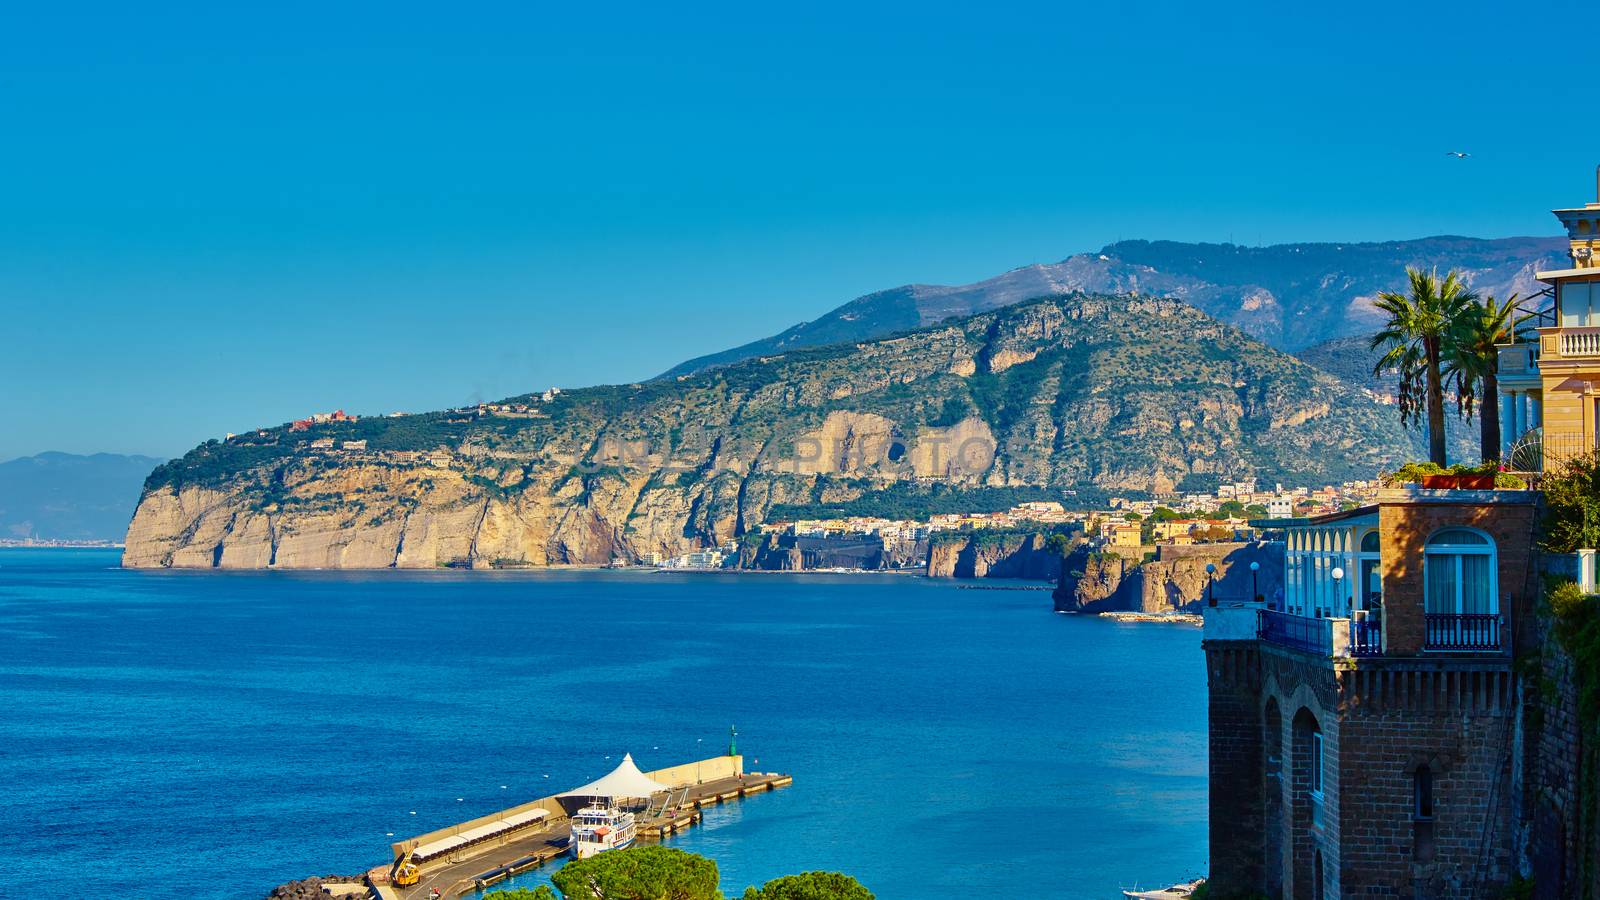 Sorrento, Italy - July 15, 2013: View from Sorrento. Sorrento is one of the towns of the Amalfi Coast,expensive and most beautiful European resort.